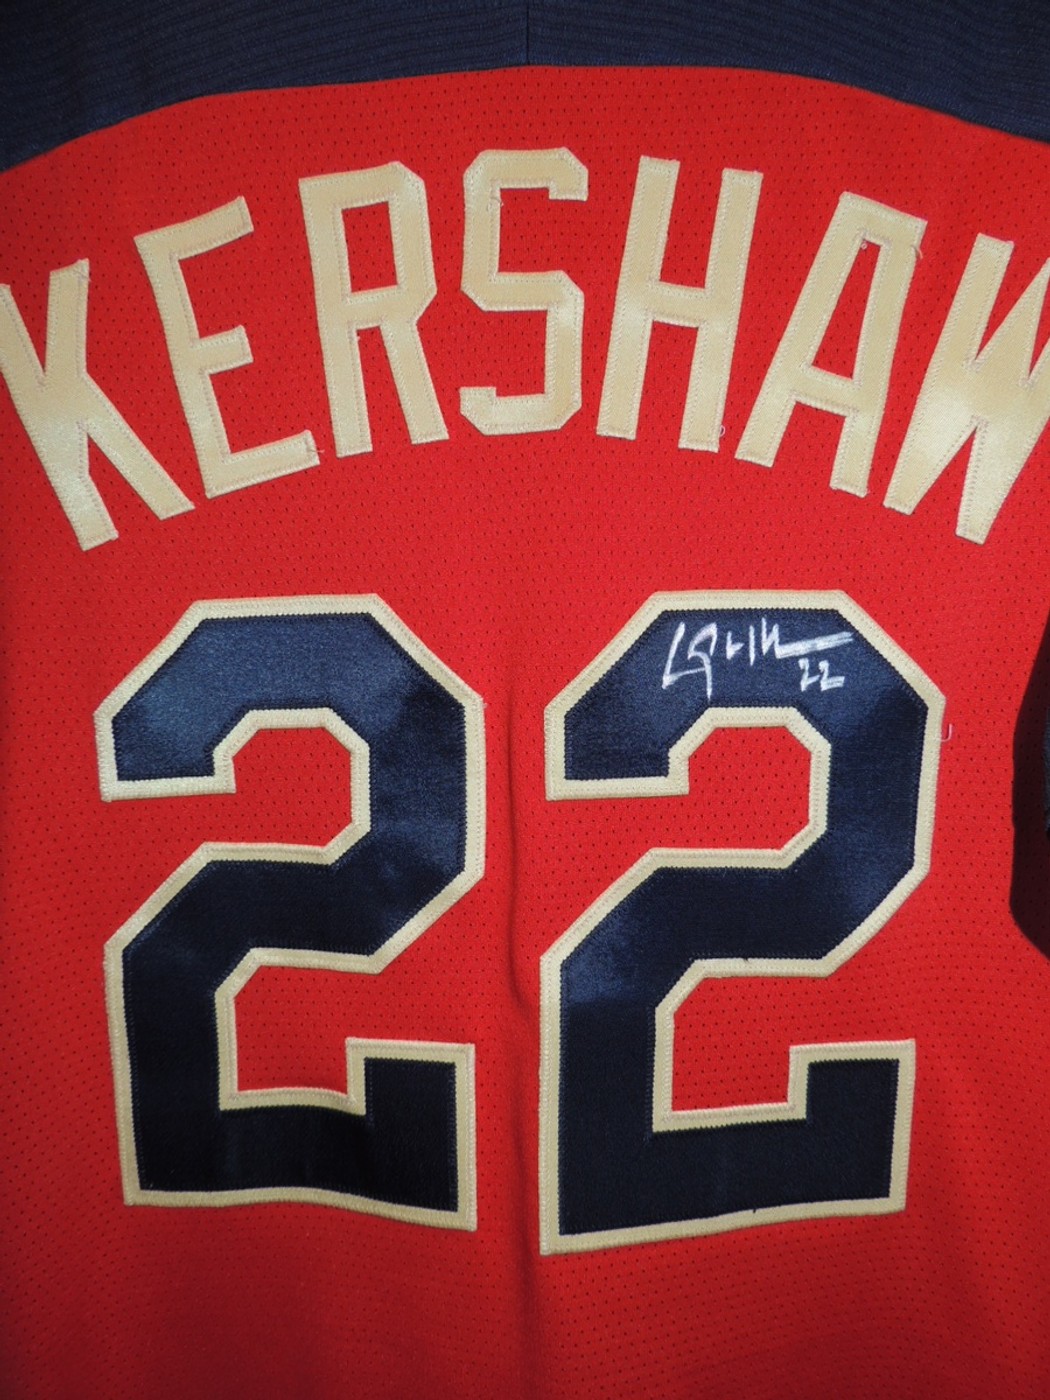 Clayton Kershaw Autographed 2014 All-Star Game NL Batting Practice Jersey